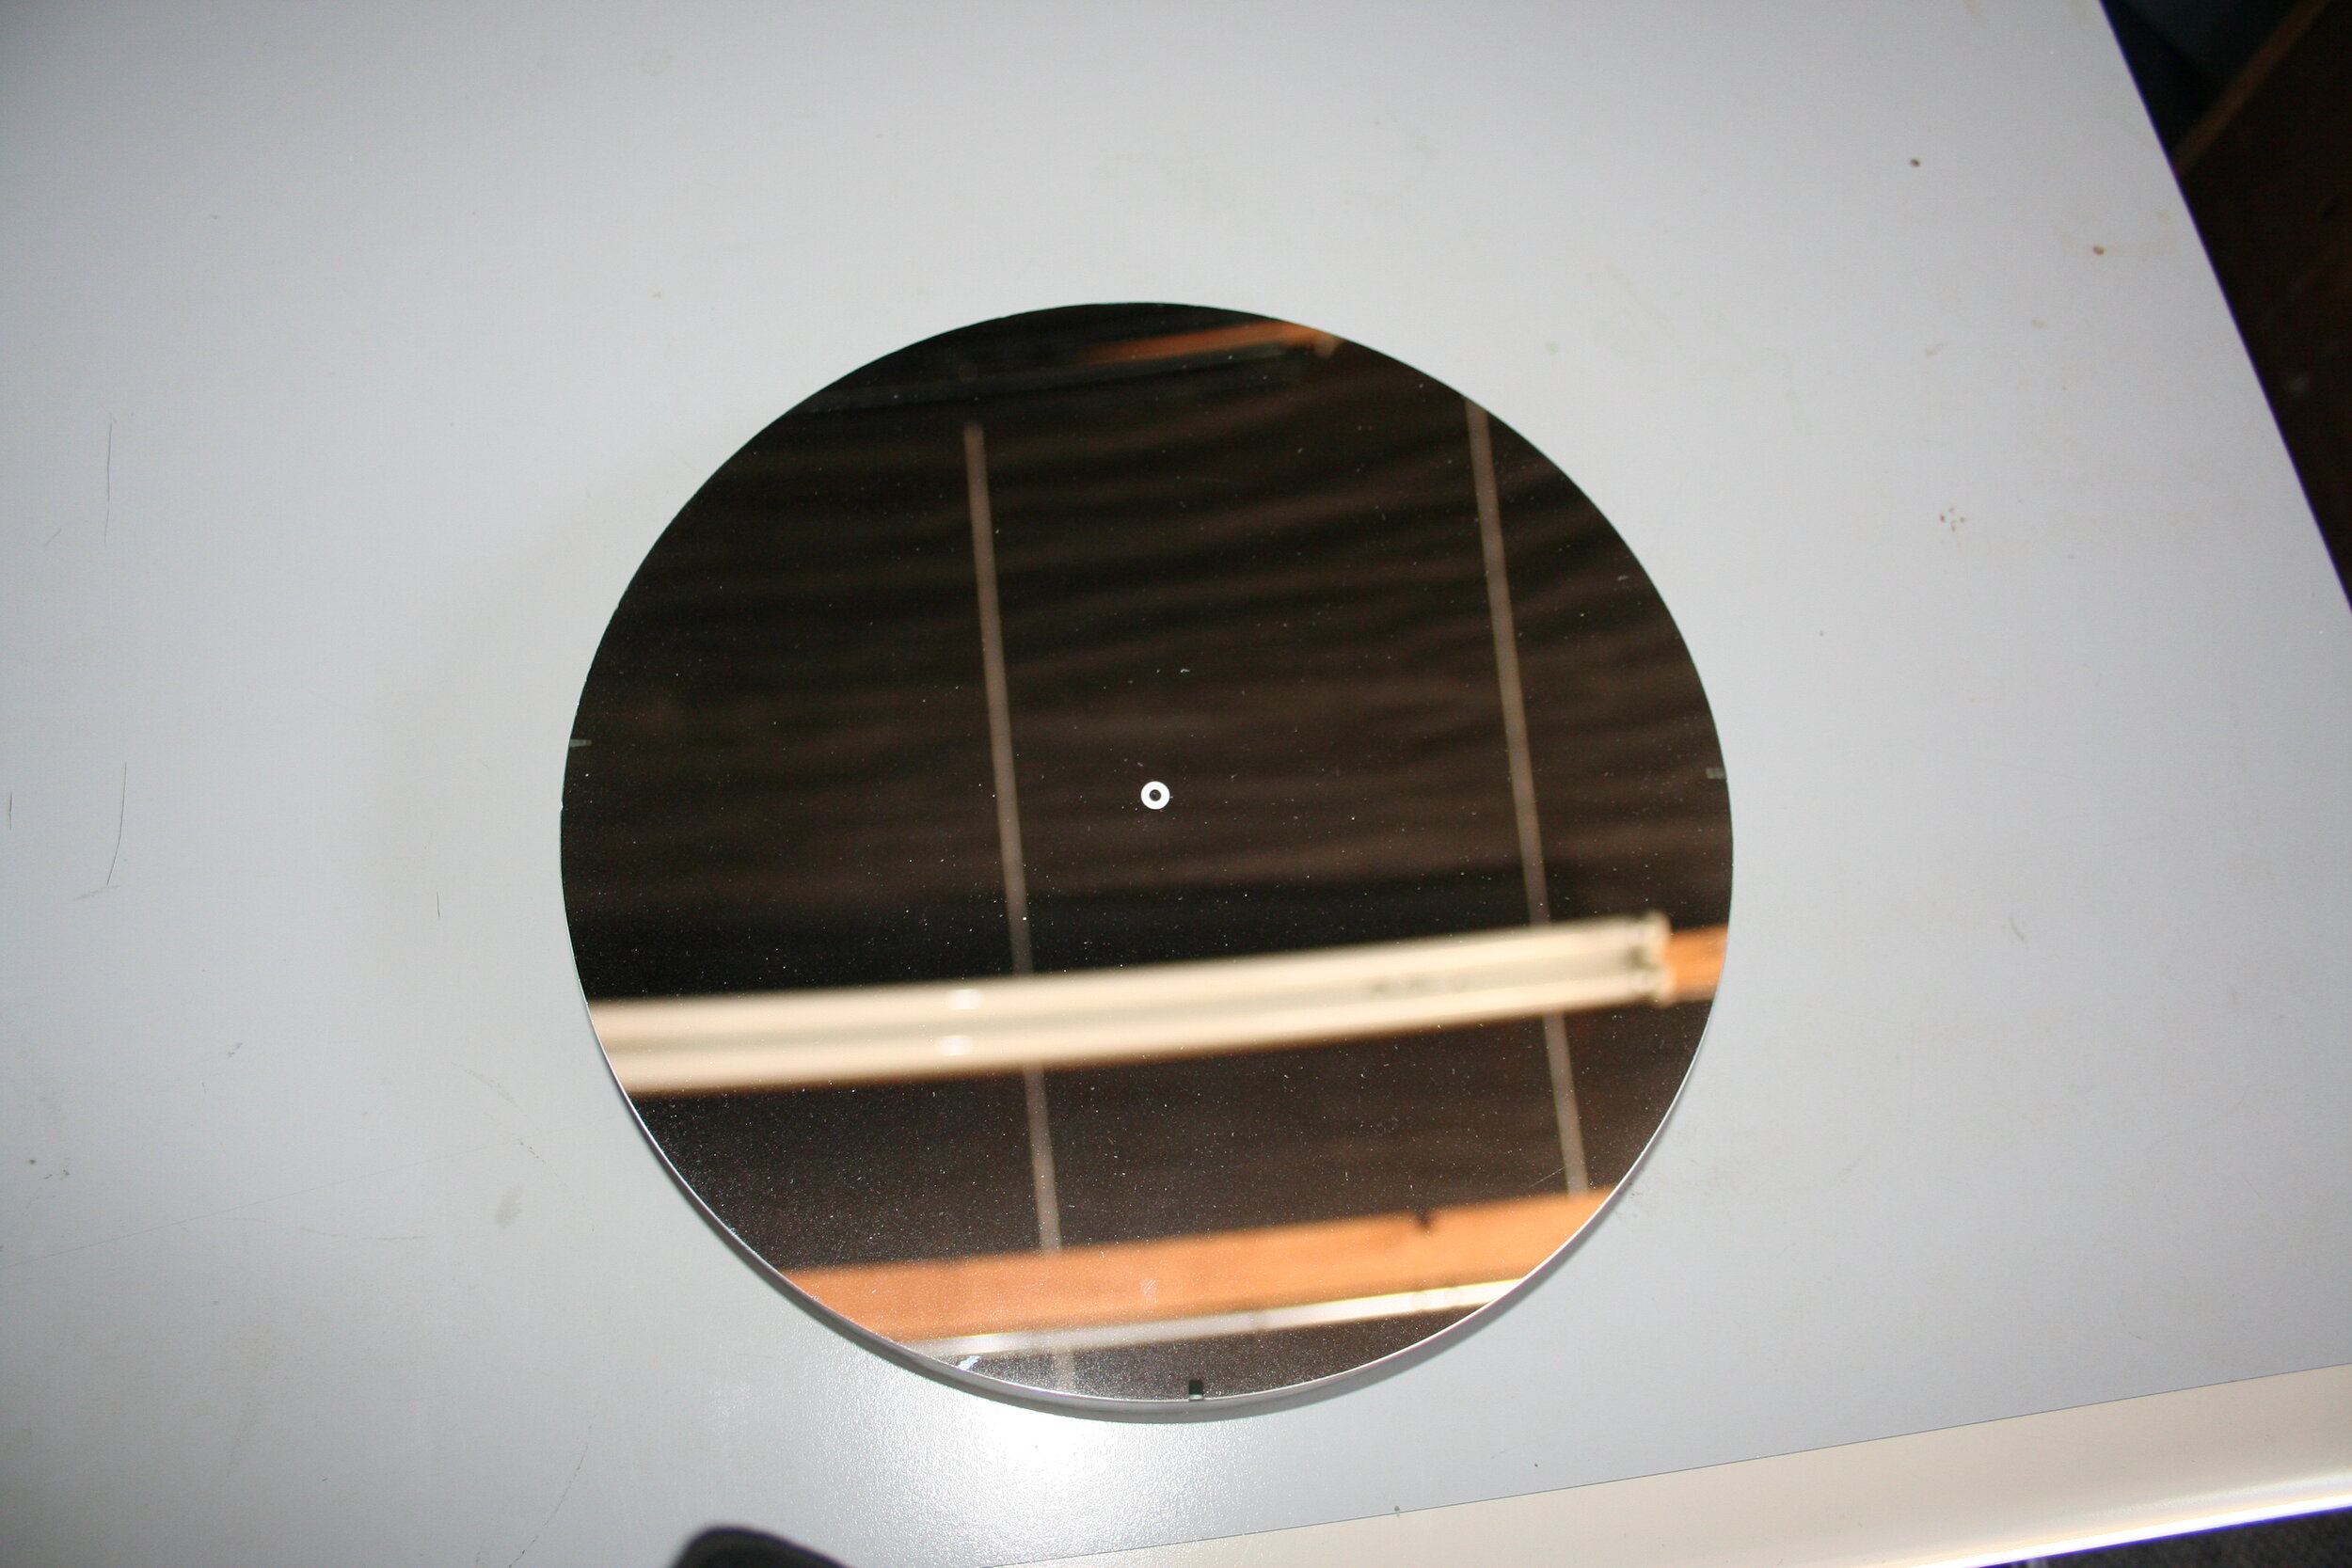 Circle on the main mirror for collimating